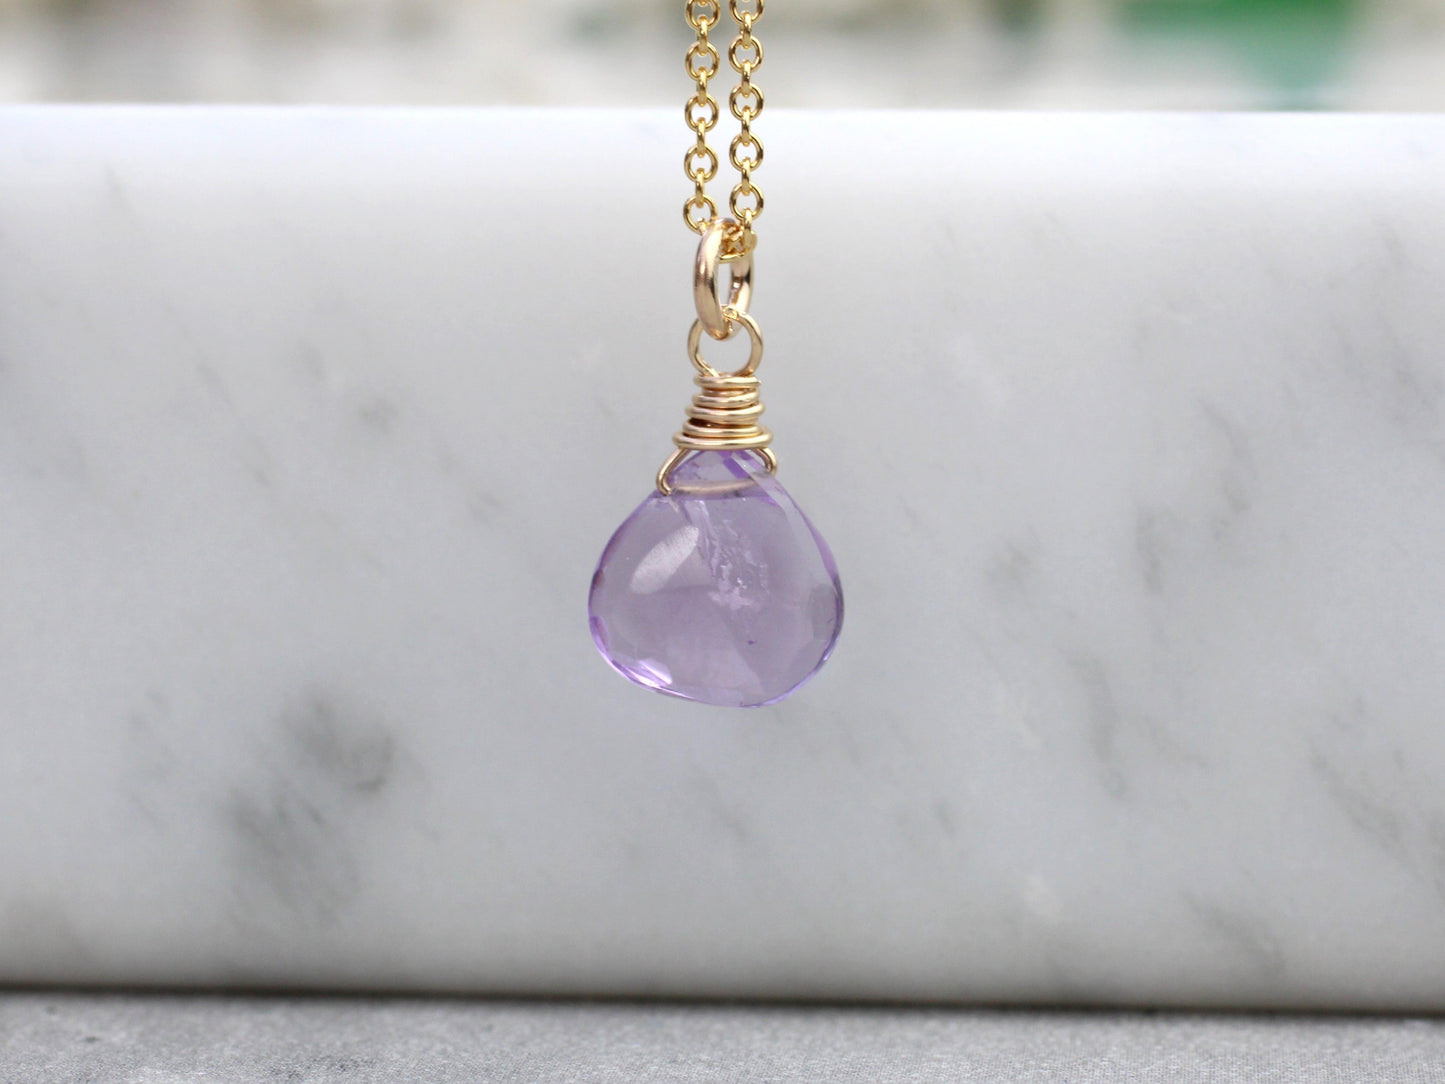 Amethyst crystal necklace in sterling silver or gold.